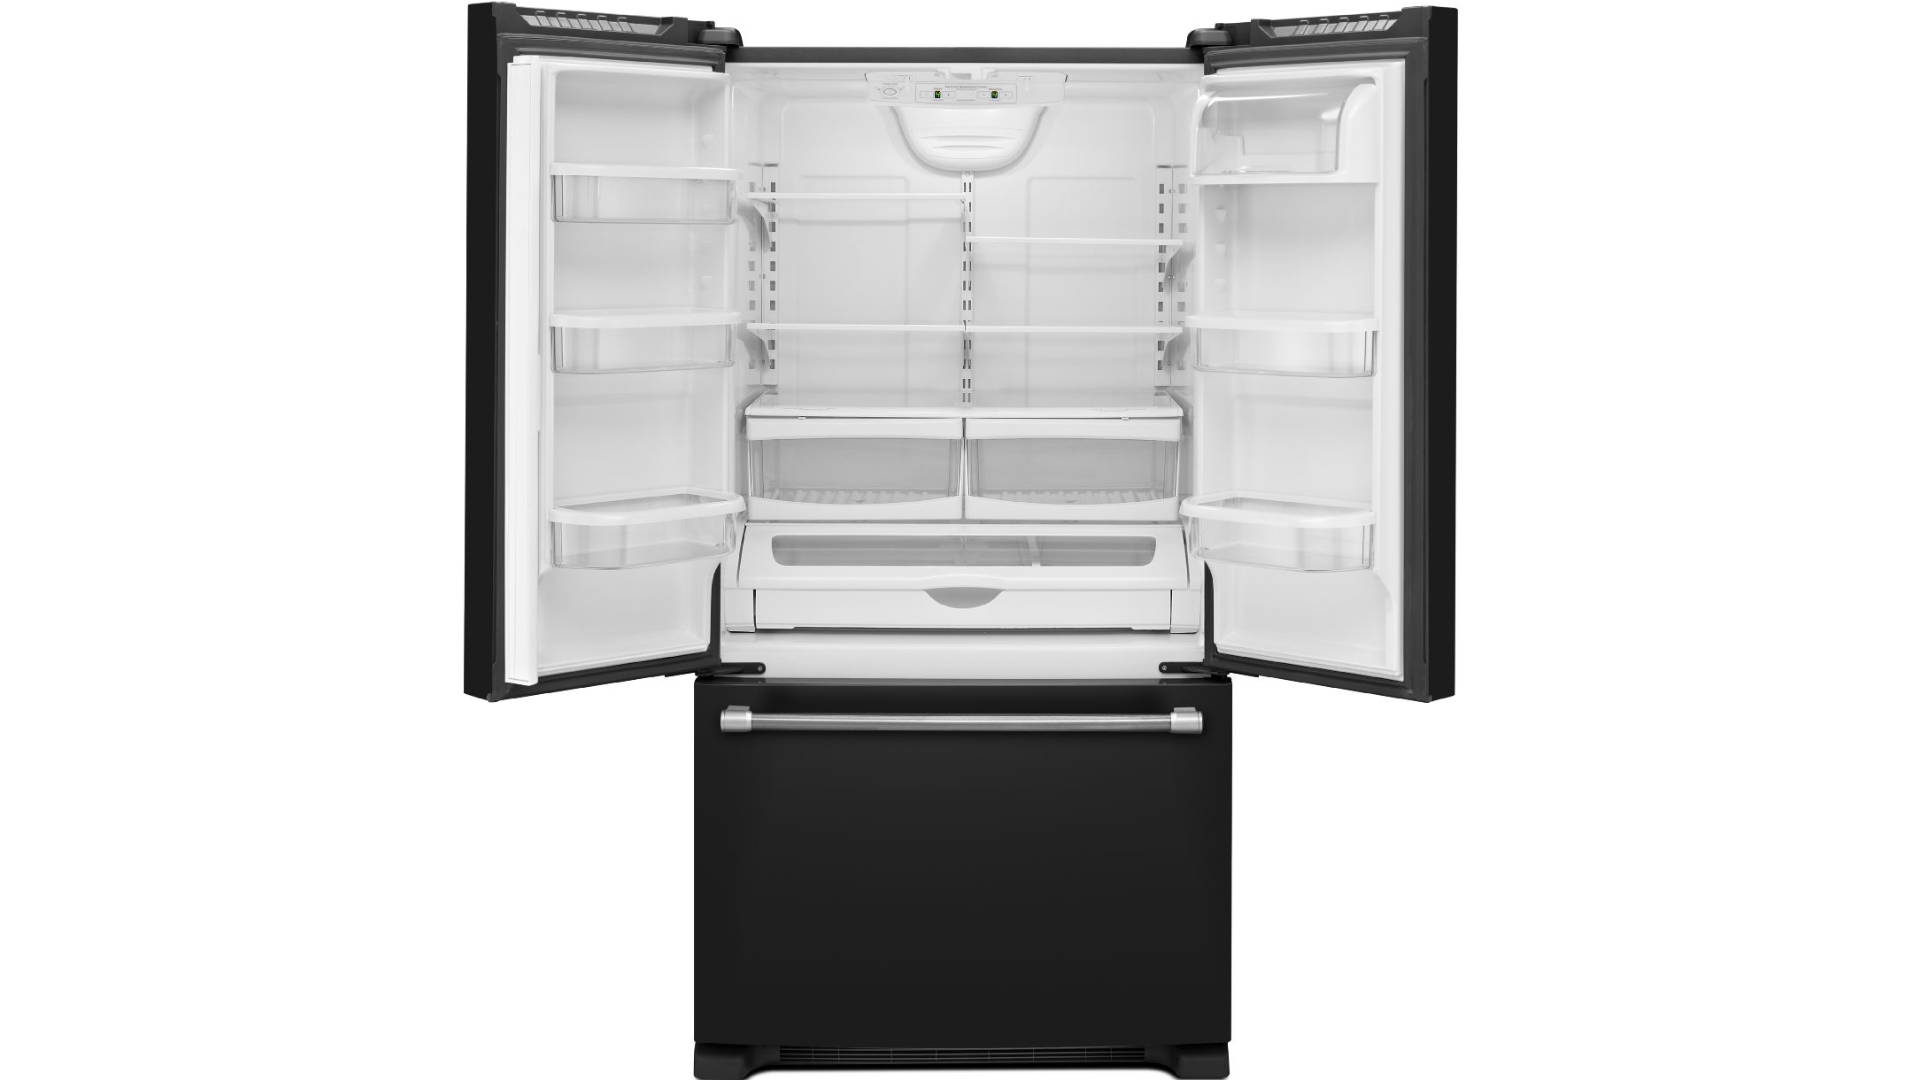 Refrigerators without water/ice dispenser drip trays : r/Appliances